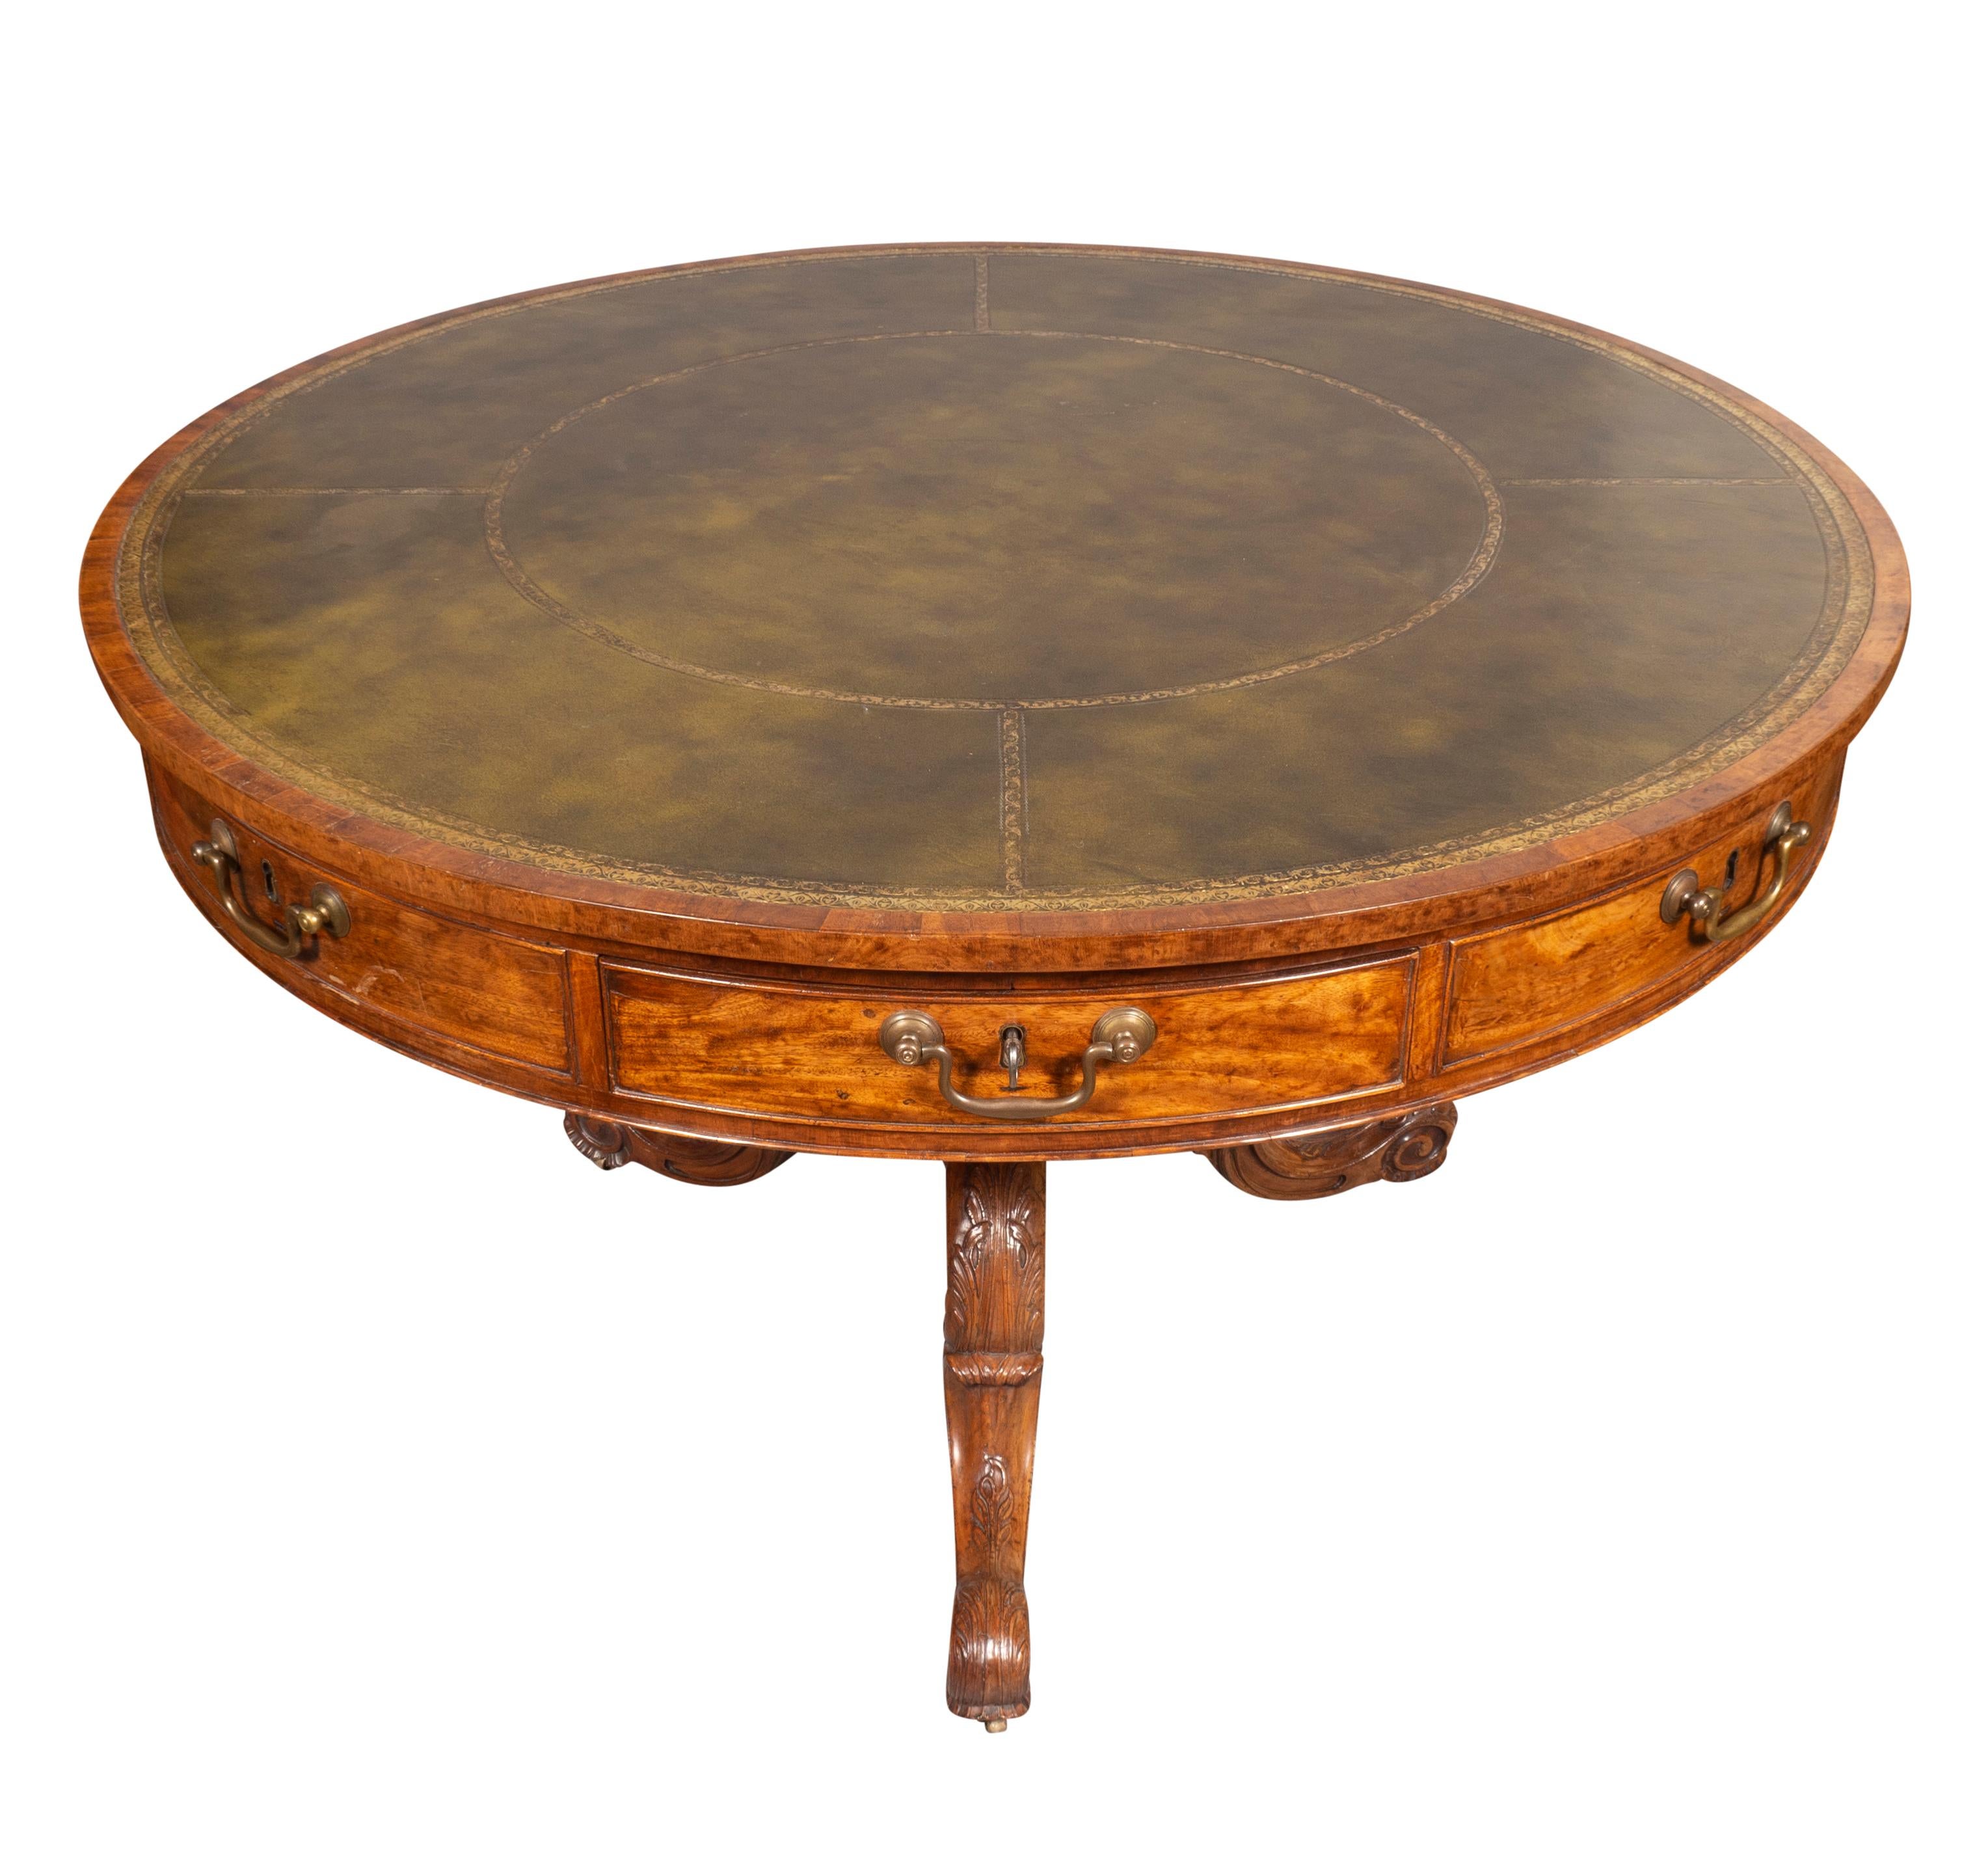 With circular top with inset tooled green leather and banded border over drawers with bail handles. The carved base with turned support and three carved cabriole legs and ending on scroll feet.